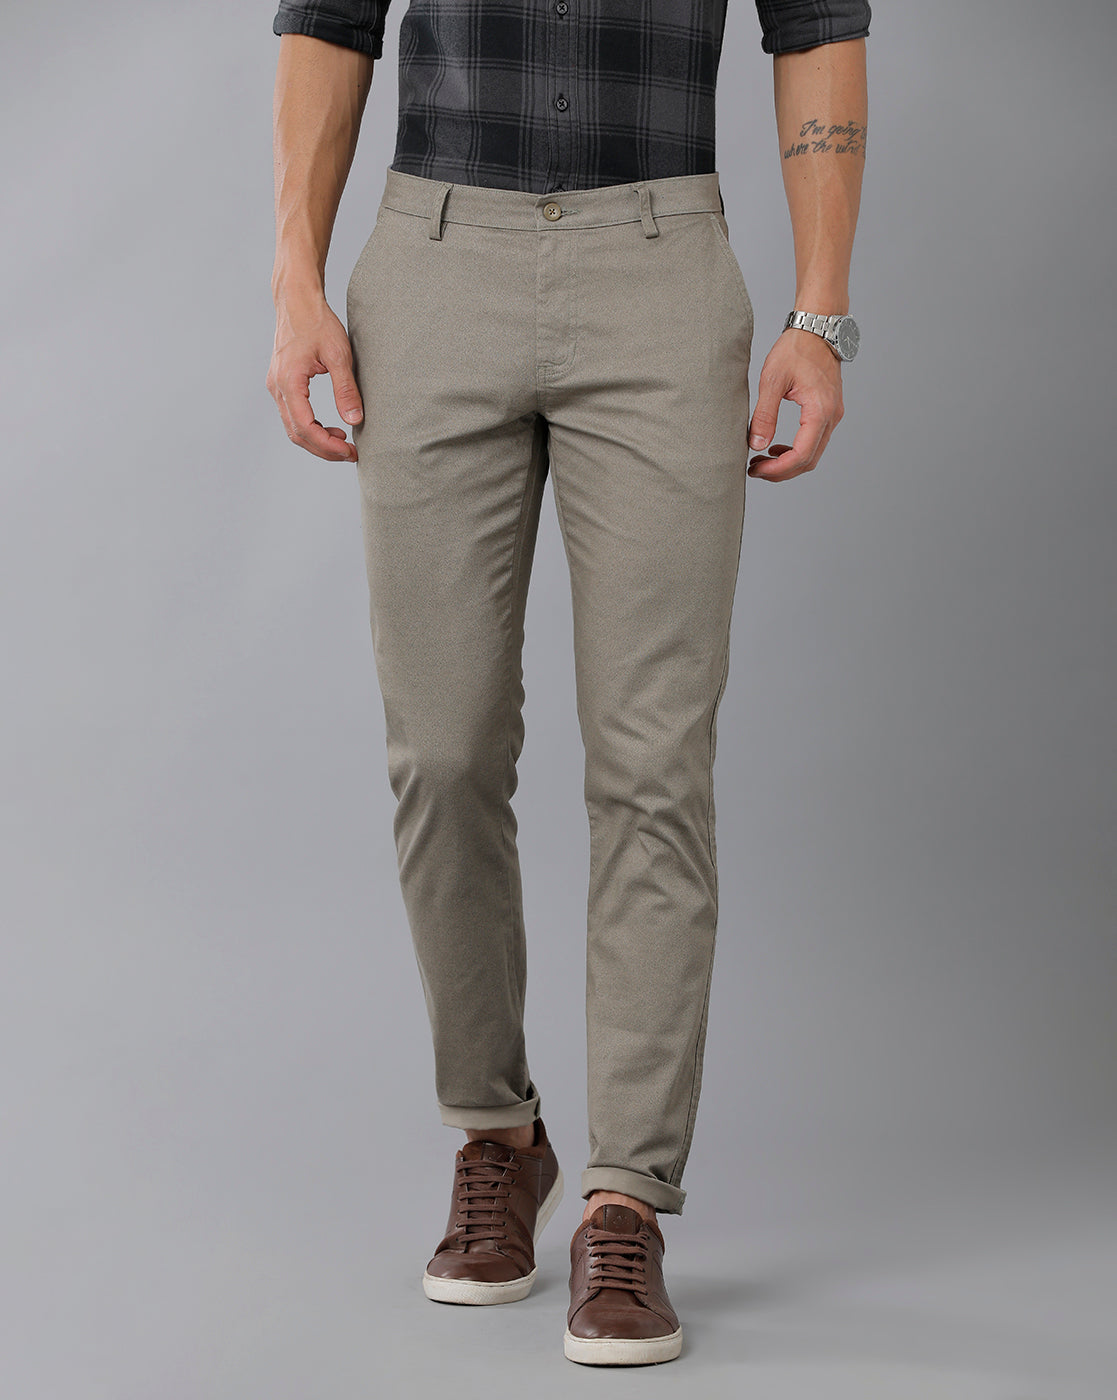 Hot Sale Fashion Mens Pants Solid Color Slim Casual Trousers  China  Clothing and Clothes price  MadeinChinacom